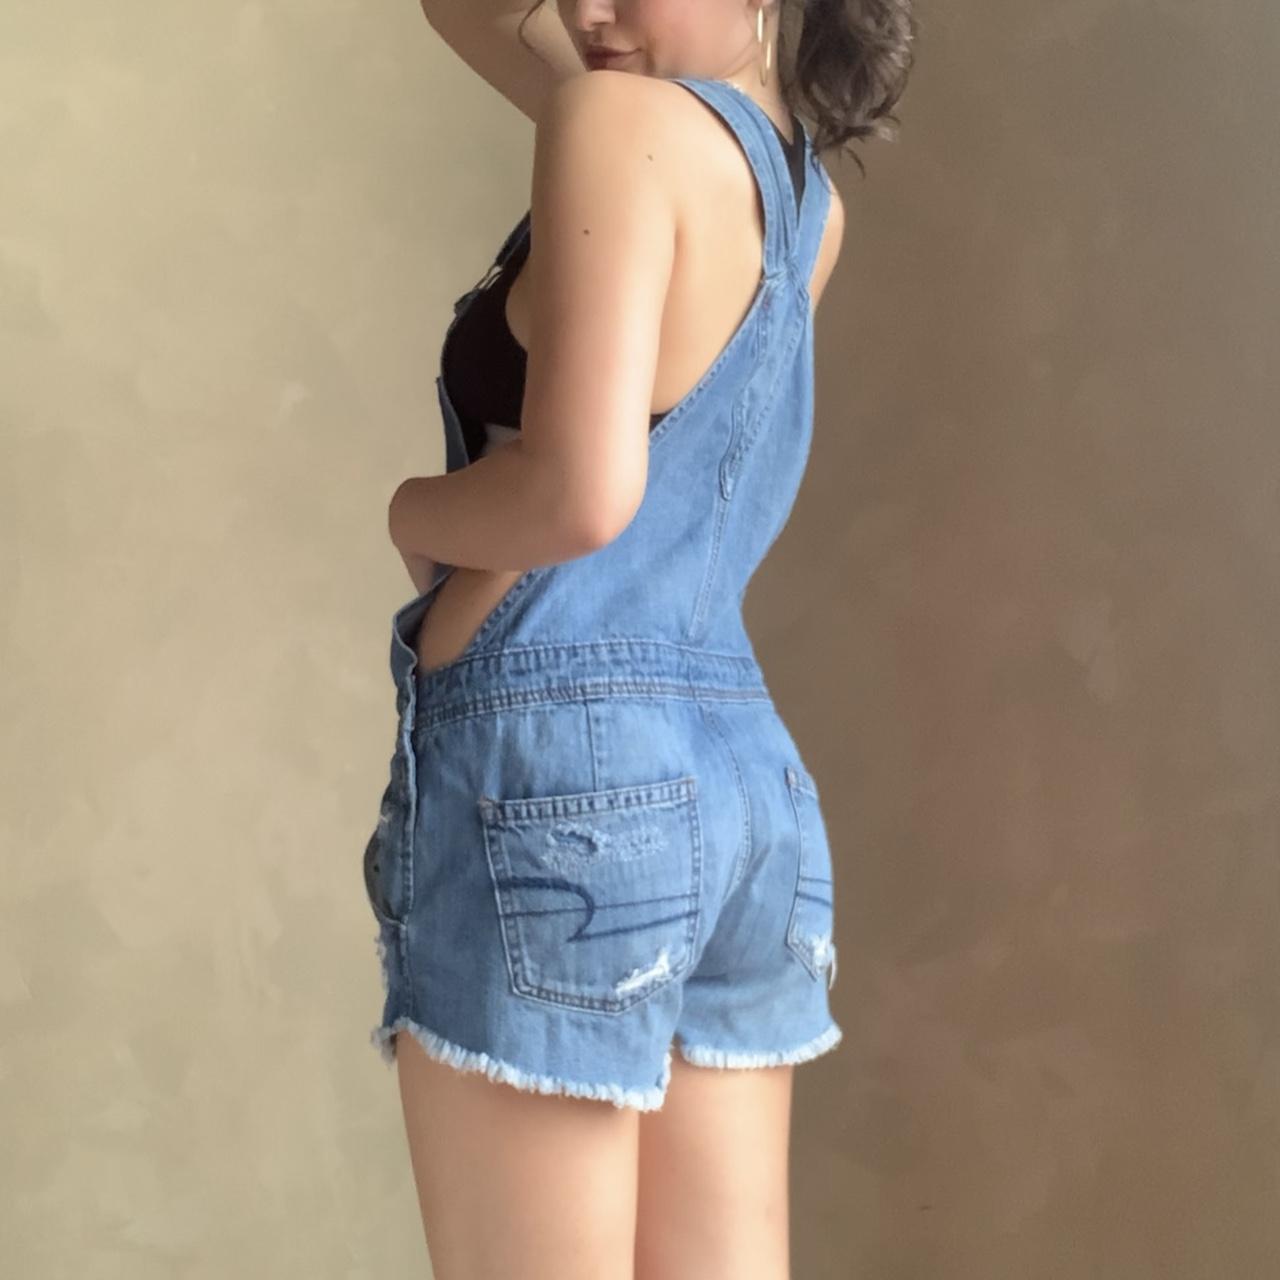 Stretchy Blue Jean Overalls